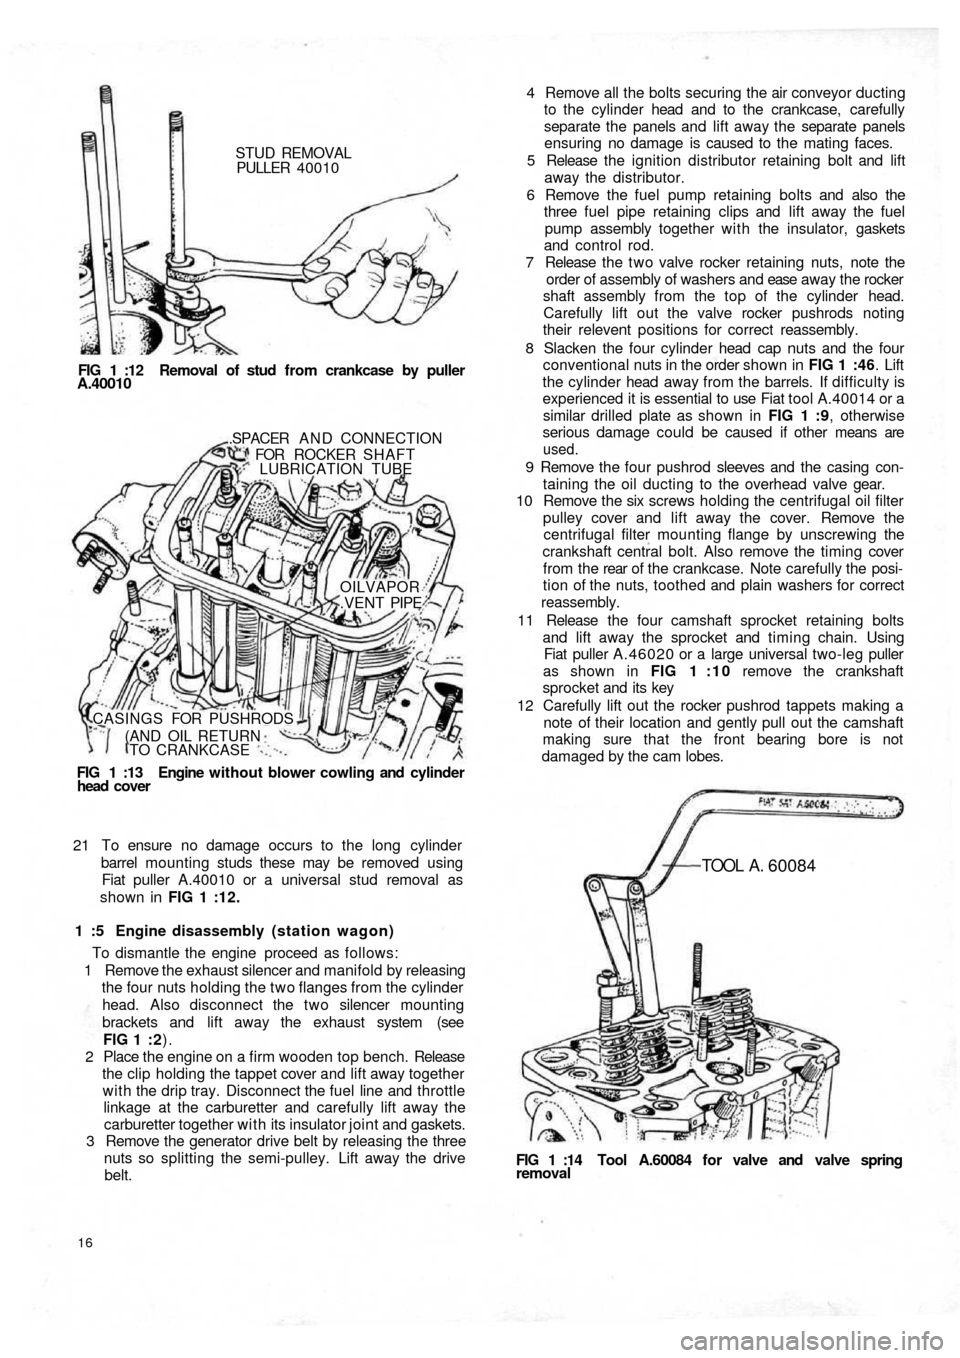 FIAT 500 1966 1.G Workshop Manual STUD REMOVAL
PULLER  40010
FIG 1 :12  Removal of stud from crankcase by puller
A.40010
FIG  1  :13   Engine  without blower cowling and cylinder
head  cover.SPACER  A N D  CONNECTION
FOR ROCKER SHAFT
